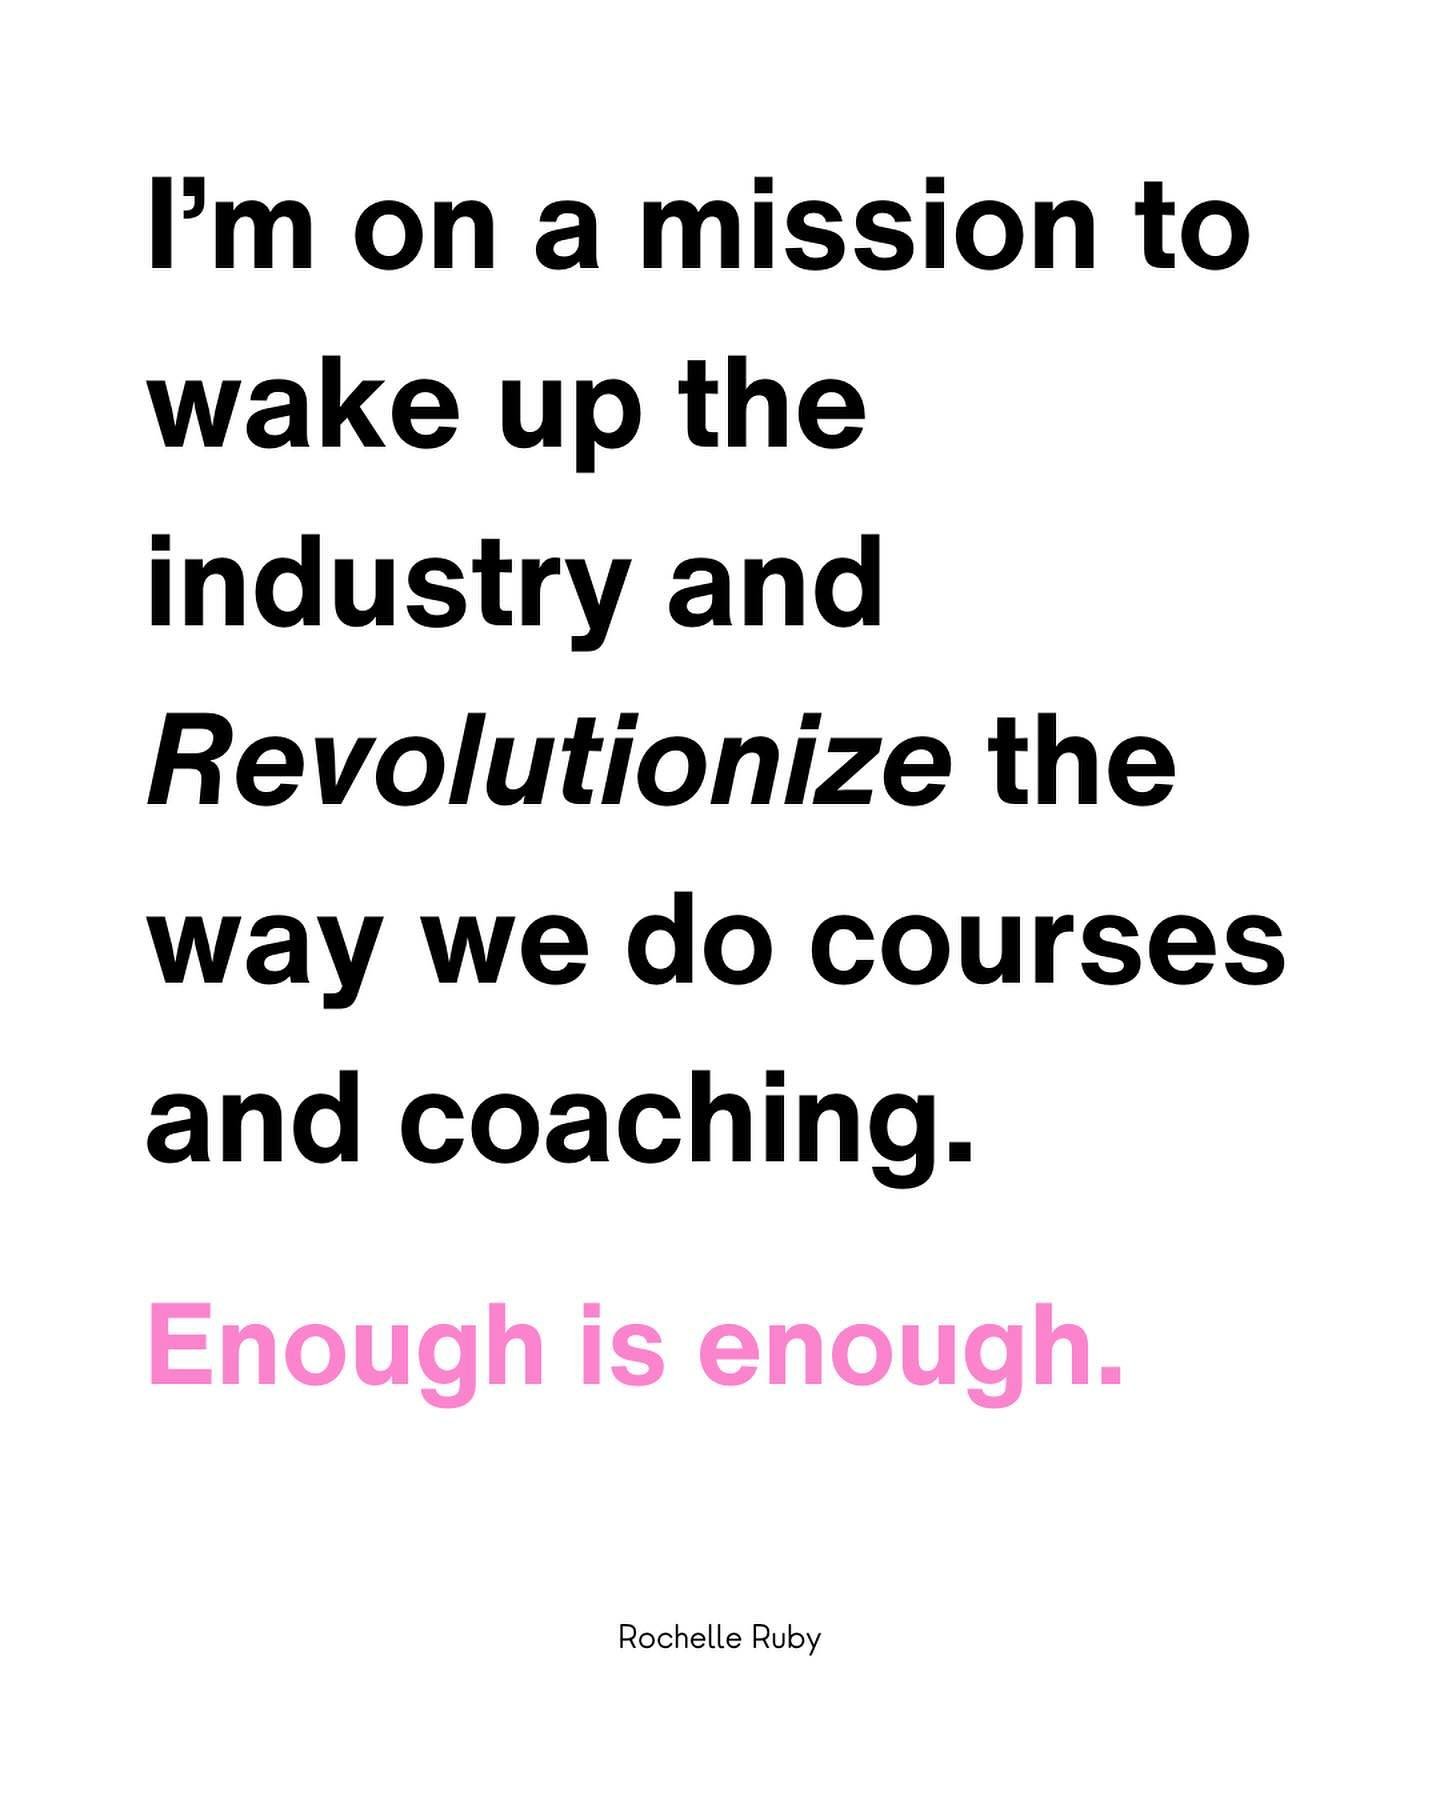 Swipe through to learn why I&rsquo;m on a mission to revolutionize the online course industry and how YOU can be a part of it.

Join the VIP waitlist for Revolutionize Your Course and get ready to create an unforgettable, transformational course.

Co